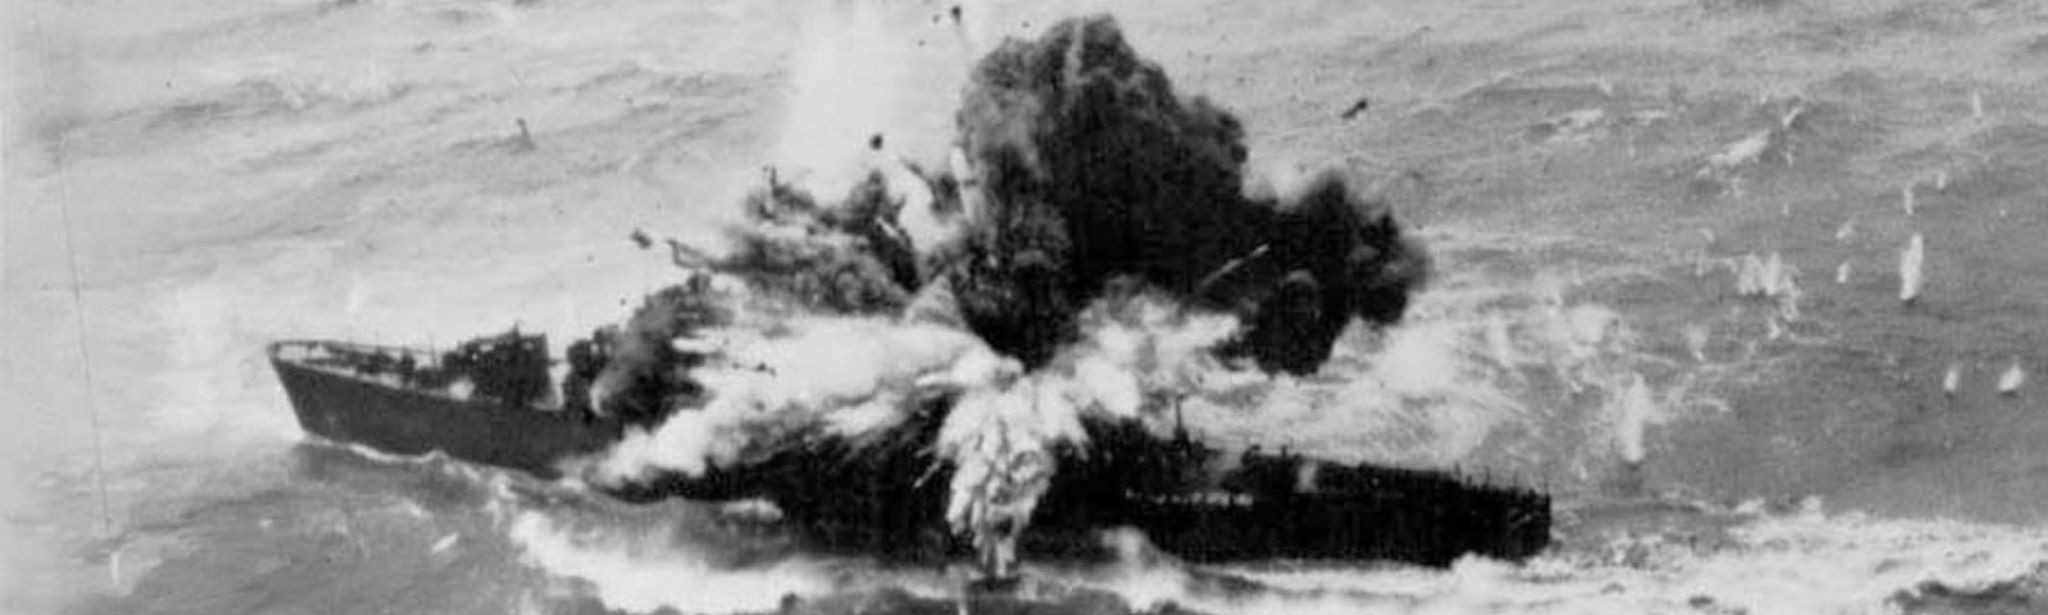 Japanese Type-C Escort Vessel No. 1 exploding in Taiwan Strait south of Amoy (Xiamen), China, 6 Apr 1945, having attacked by US B-25J (44-29600; 2Lt Francis A. Thompson) of 499th 'Bats Outta Hell' Bomb Squadron of 345th 'Air Apaches' Bomb Group